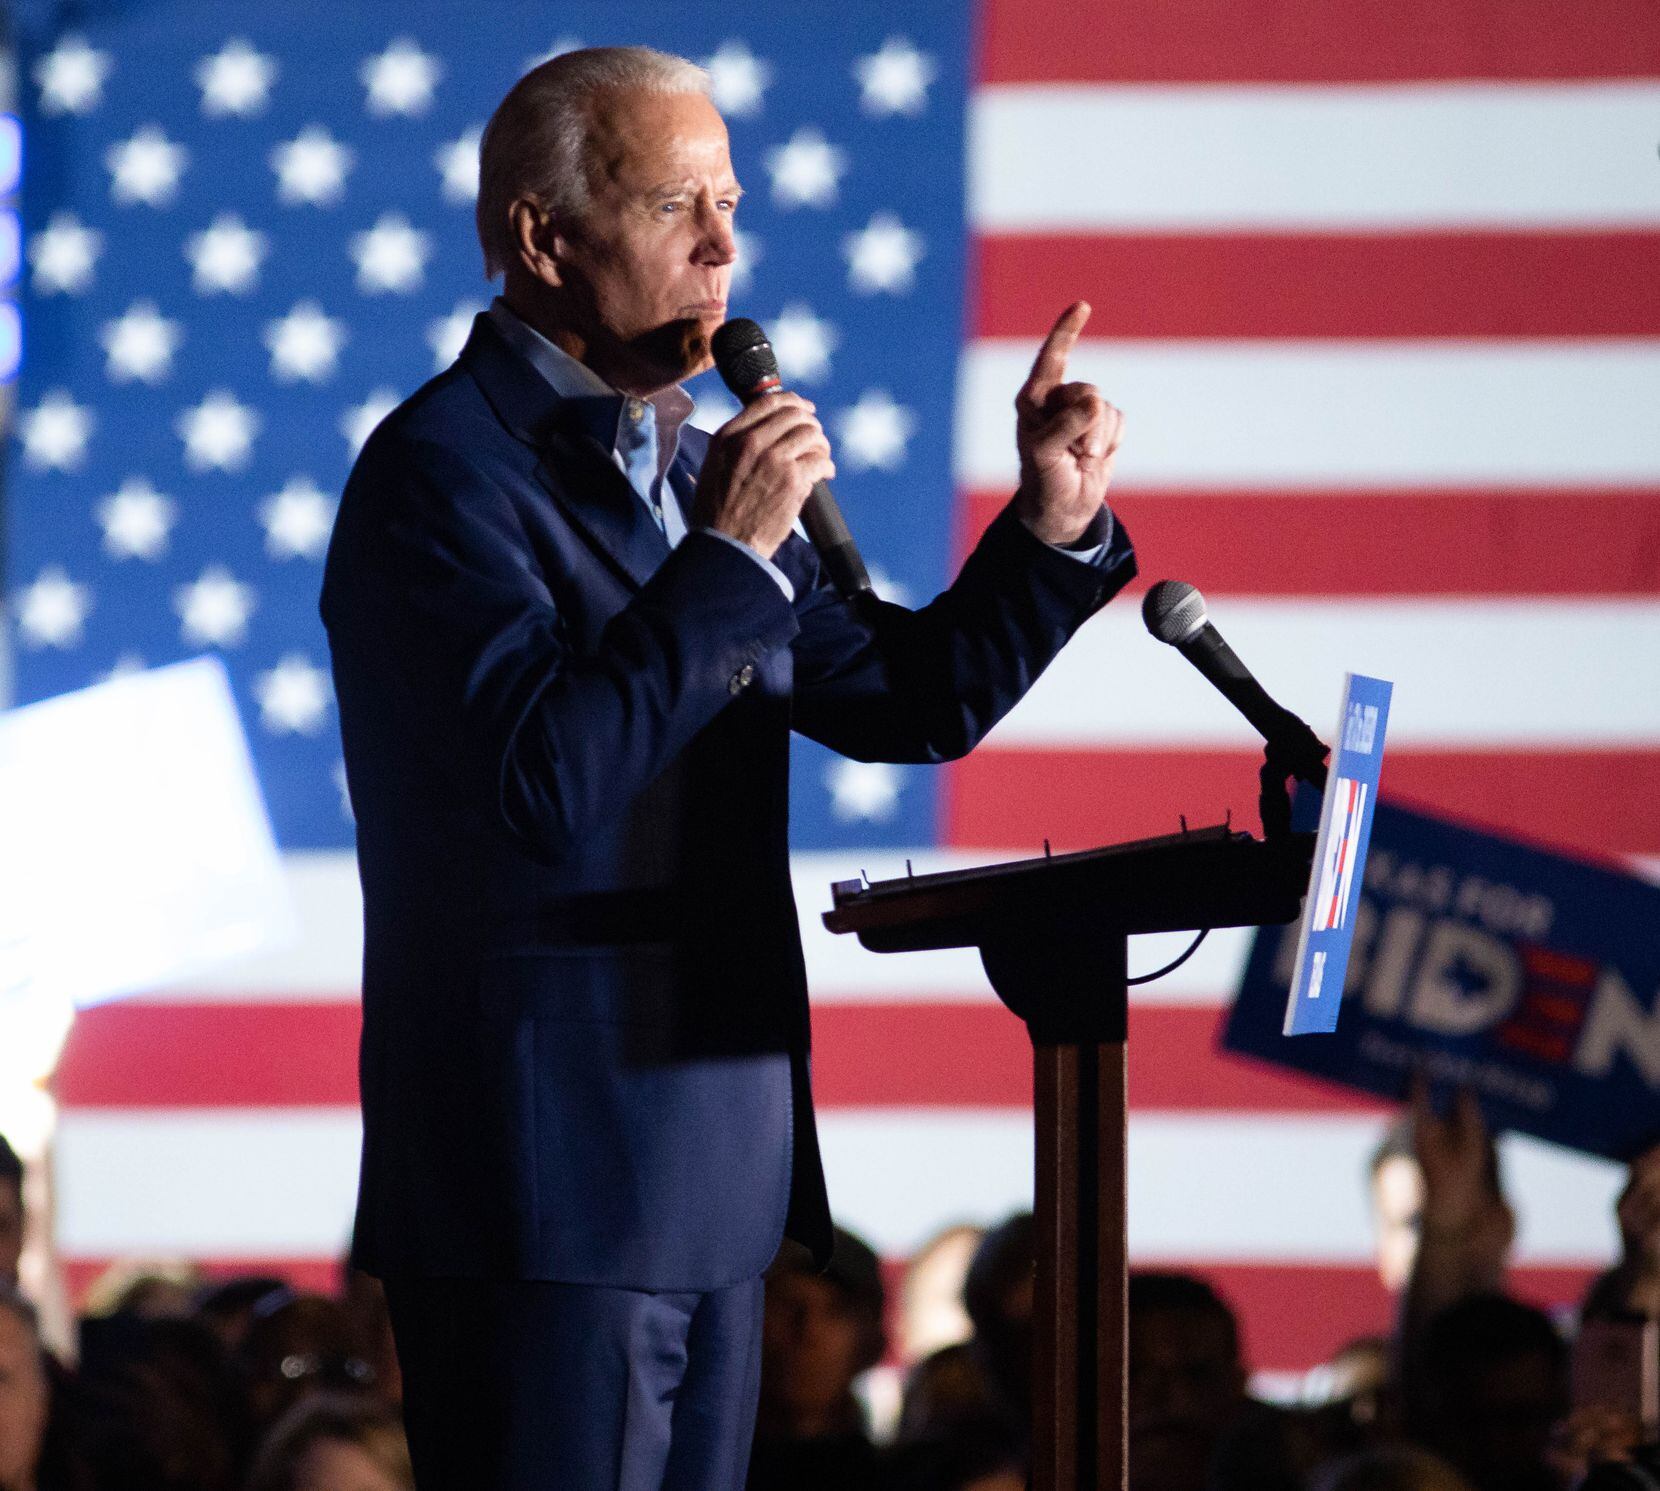 Democratic presidential primary candidate Joe Biden speaks during a rally held at Gilley's in Dallas on March 2, 2020.